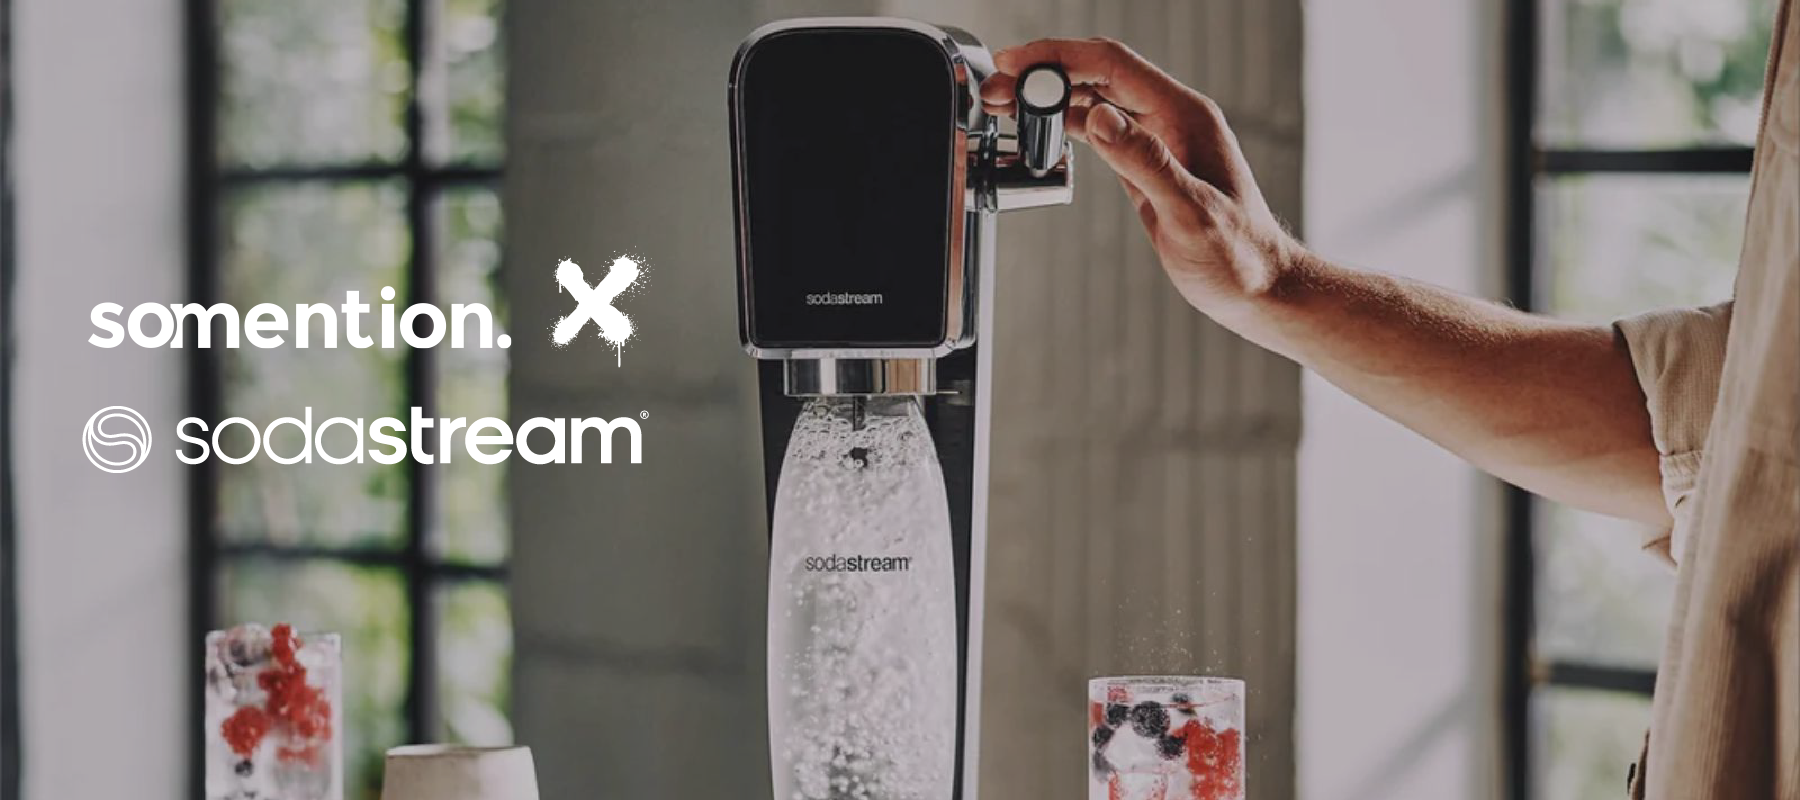 SodaStream Benelux chooses Somention for their influencer campaigns